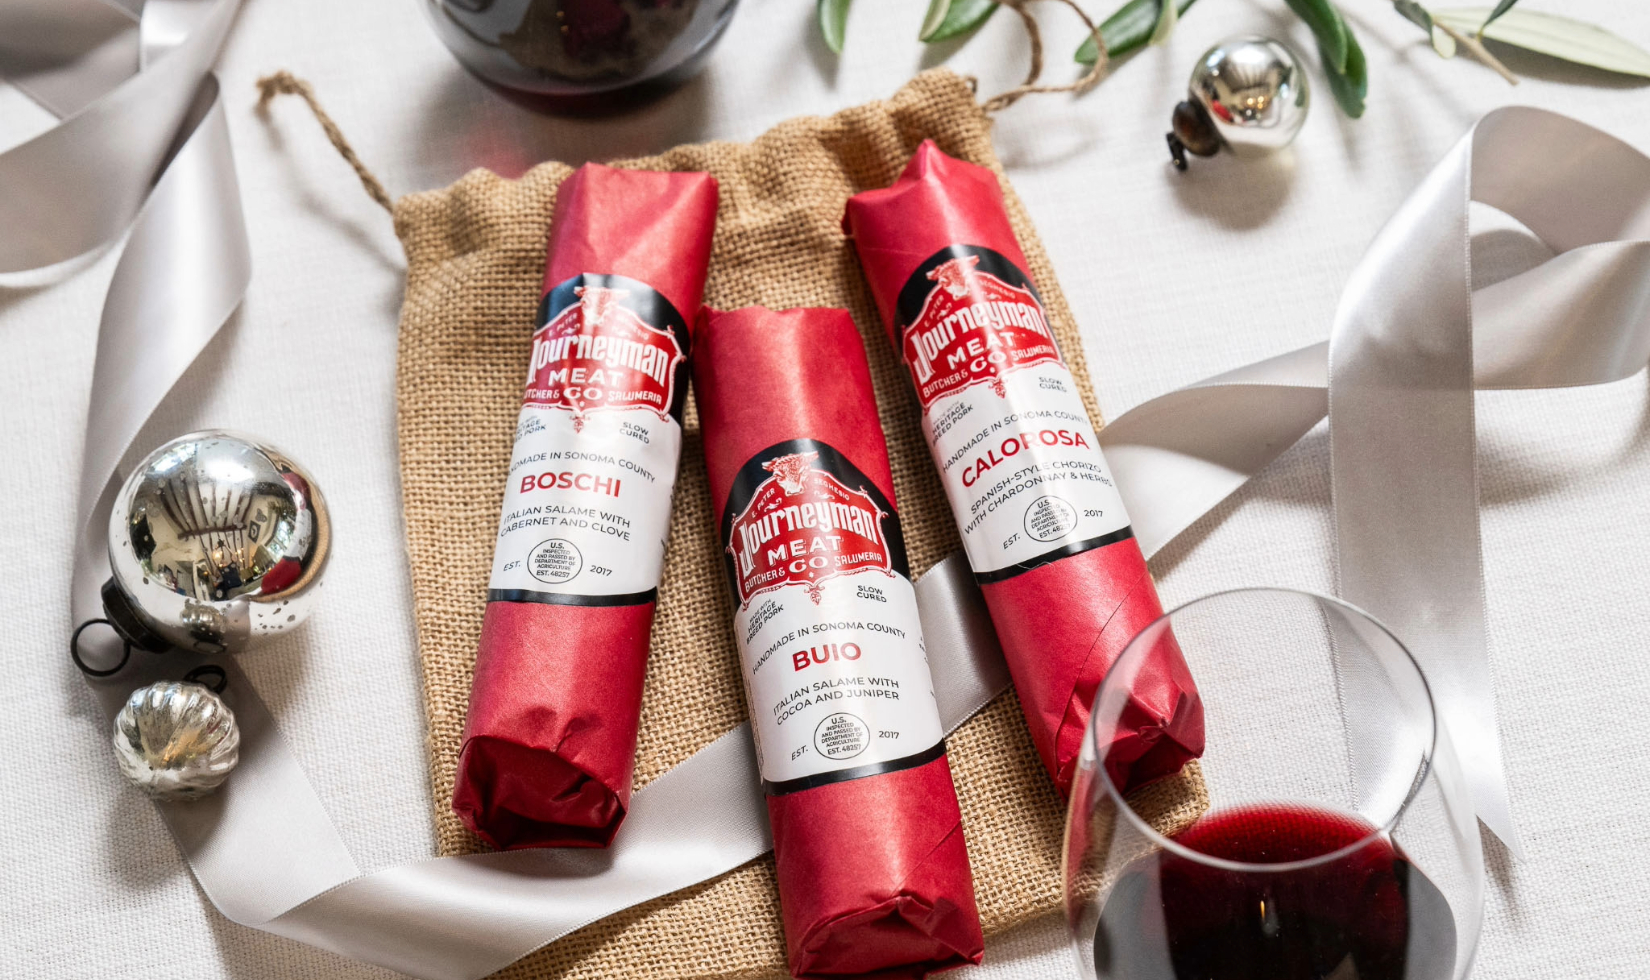 Three rolls of salumi wrapped in red packaging on table decorated with silver christmas ornaments and ribbon